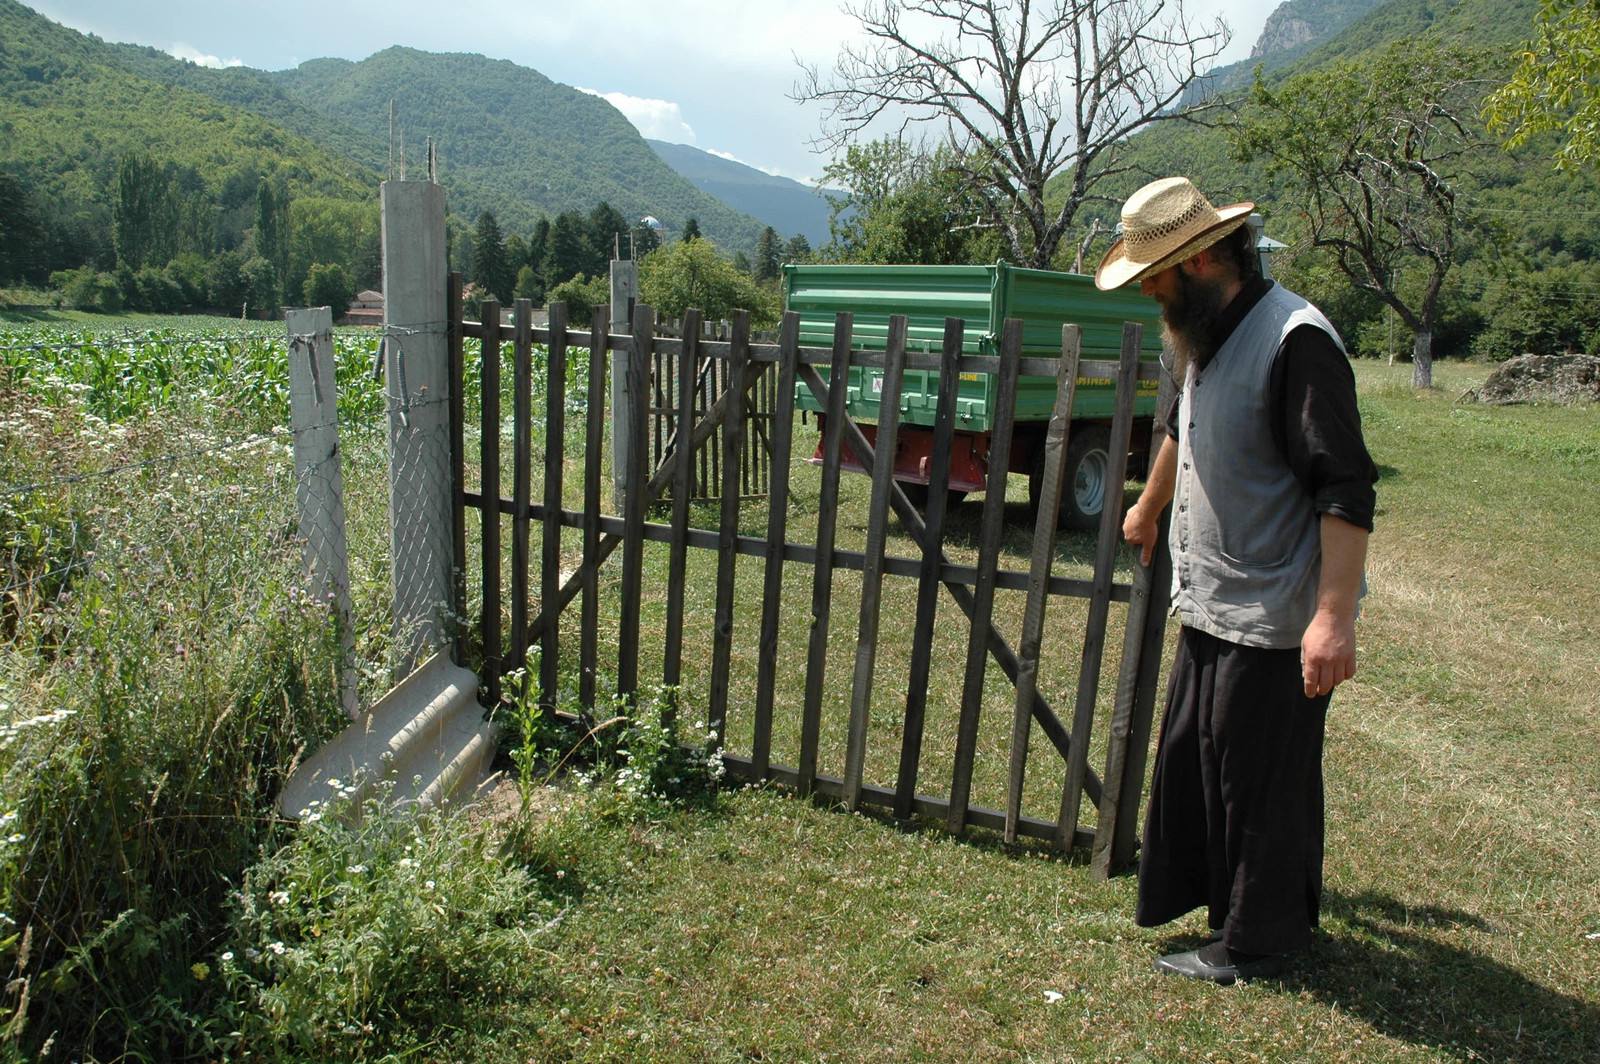 Monk opening a gate for the harvestor to enter